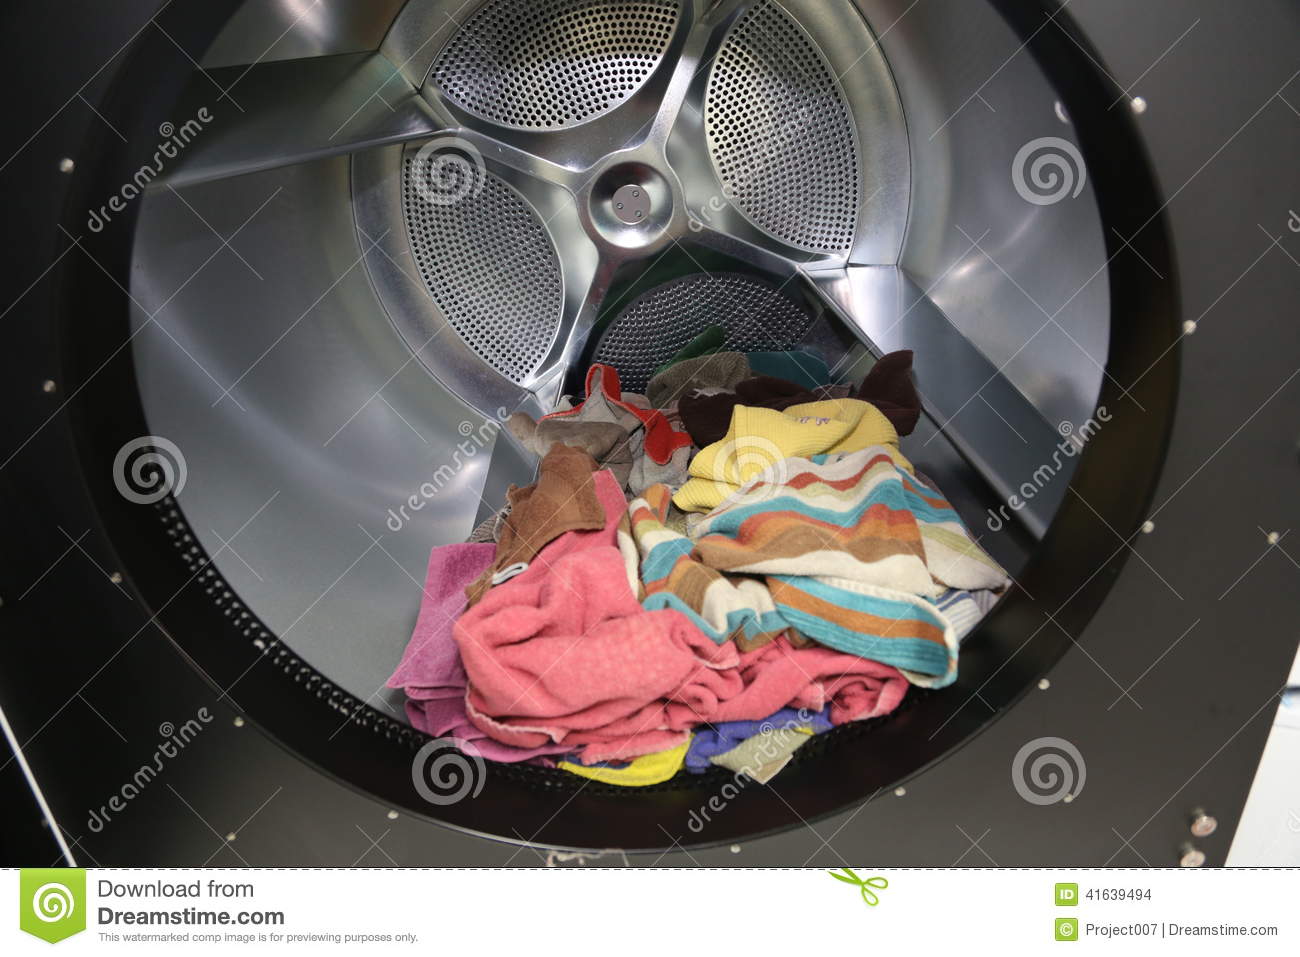 Towels Inside The Drum Of A Huge Industrial Dryer Machine At A Laundry